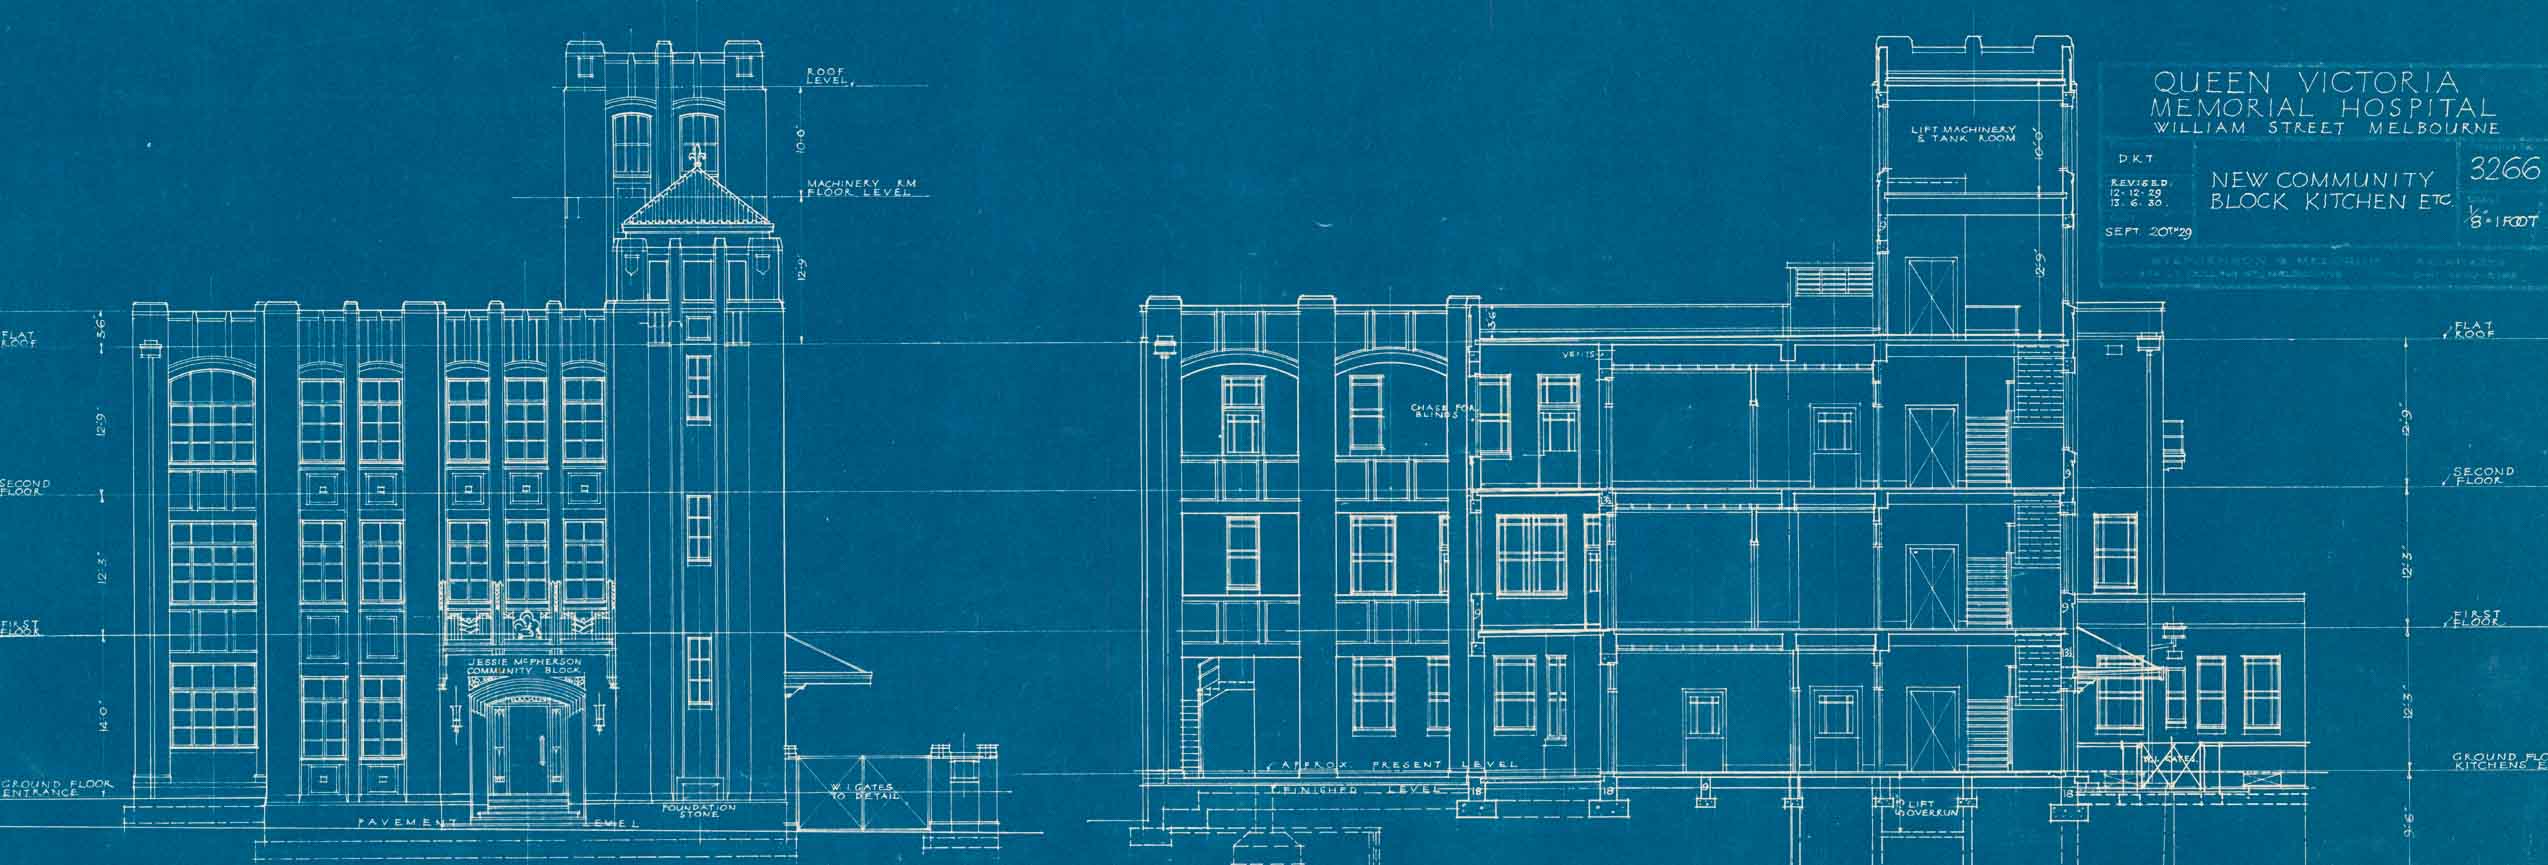 Schematic plans for a building